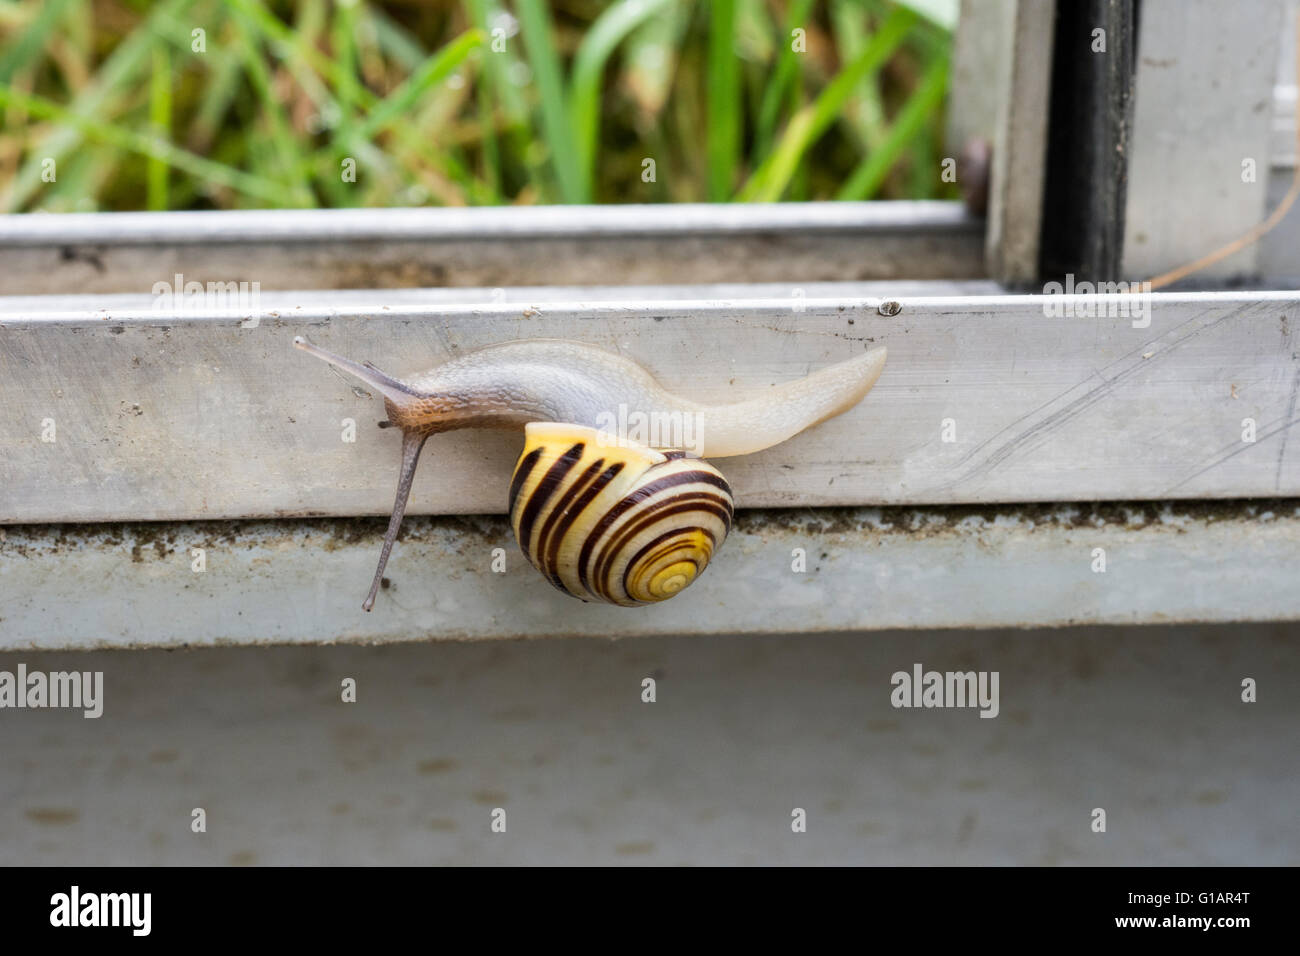 white-lipped snail (Cepaea hortensis) in a greenhouse Stock Photo